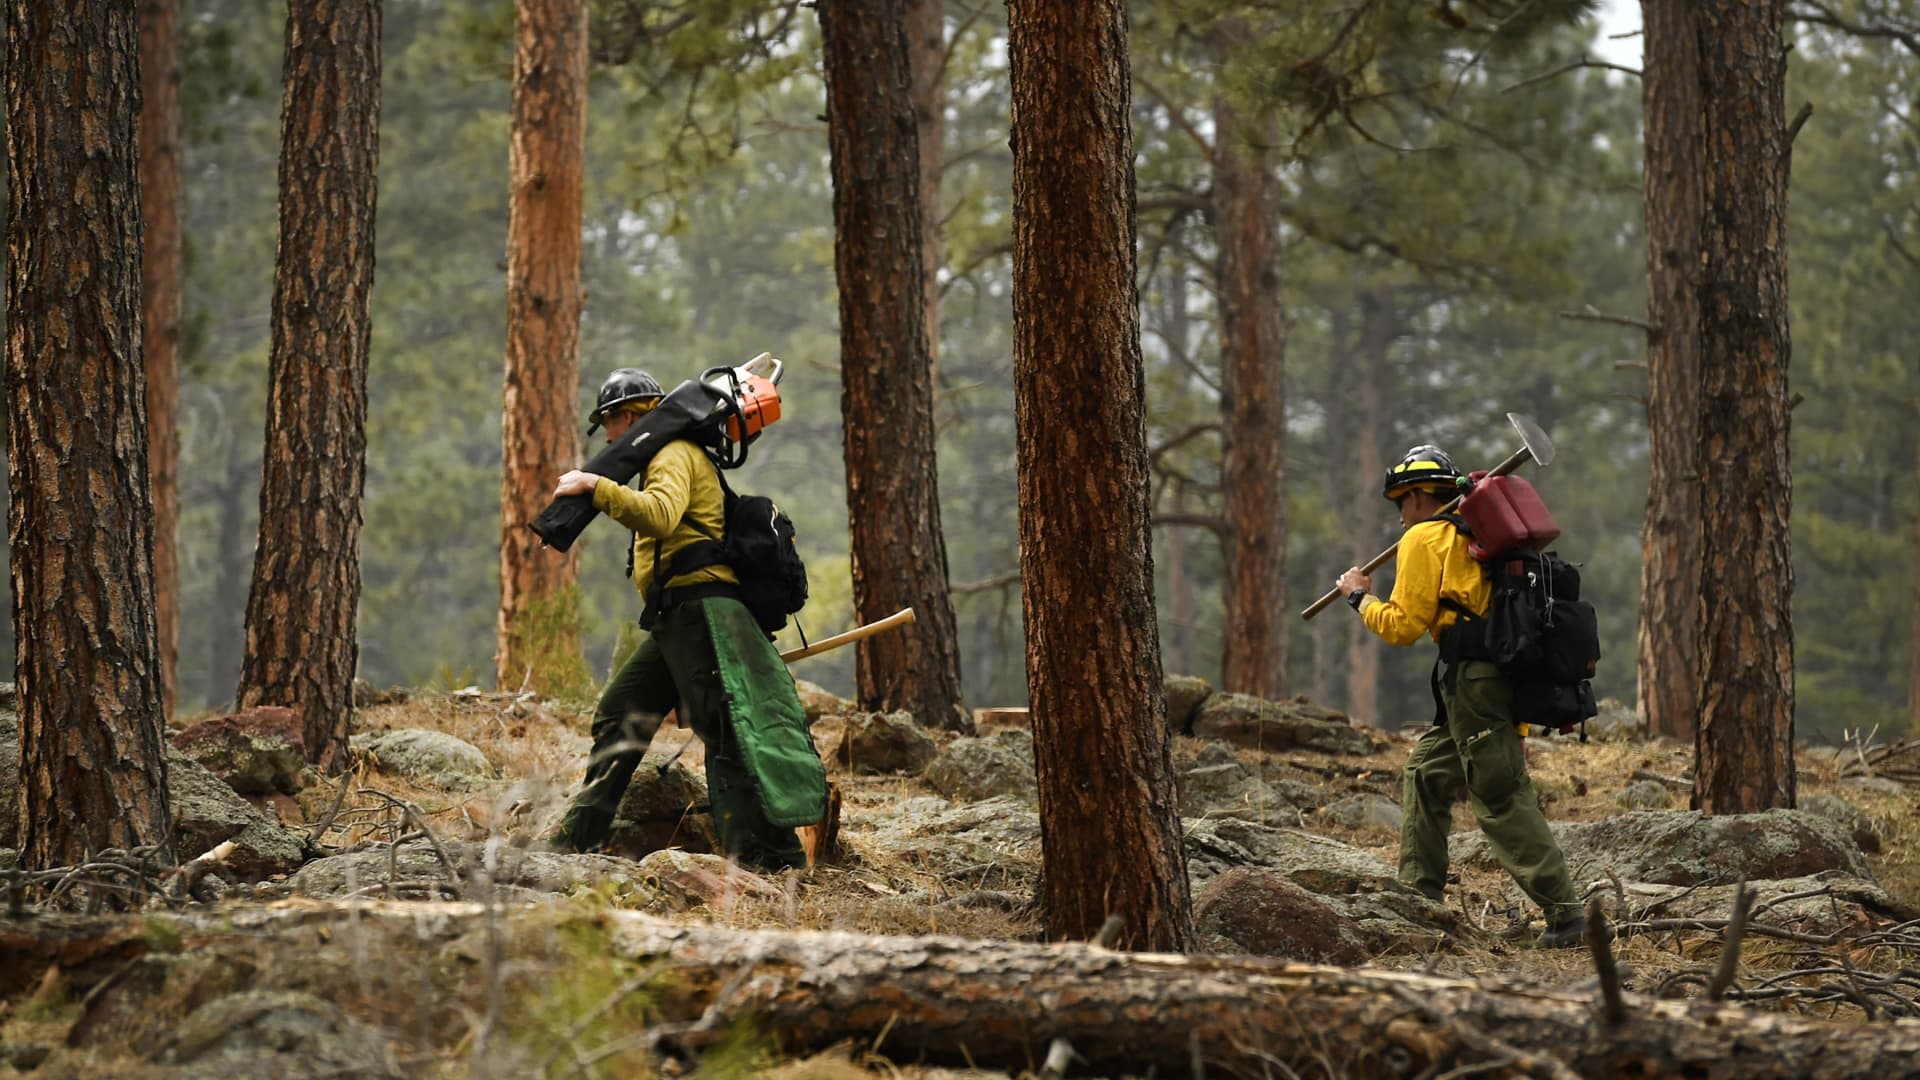 Firefighters head into the woods to cut line as the NCAR fire continues to burn in the foothills south of the National Center for Atmospheric Research on March 27, 2022 in Boulder, Colorado.